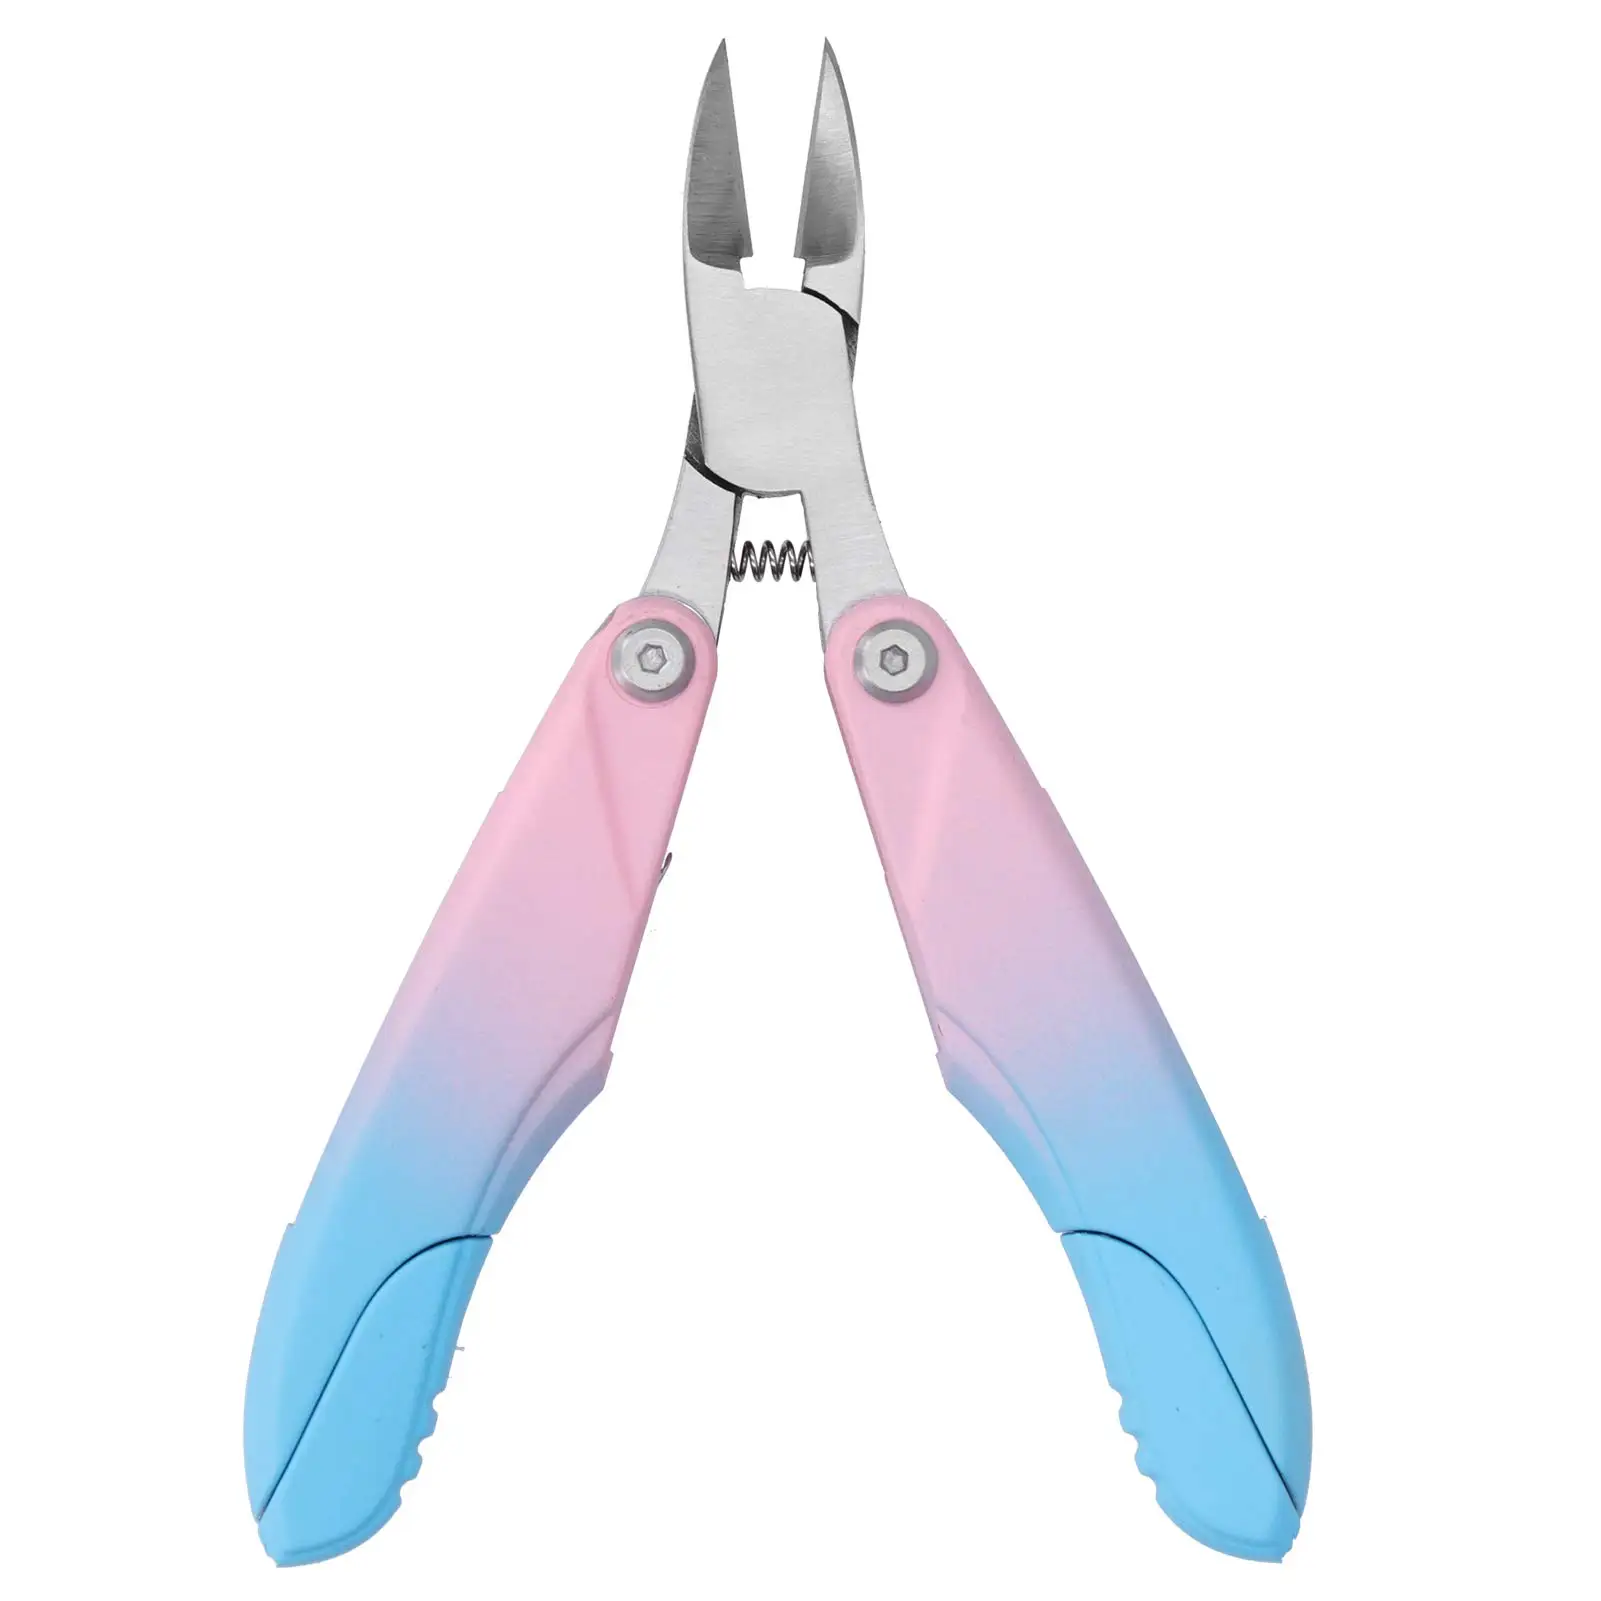 Toenail Clippers, Professional Thick & Ingrown Toe Nail Clippers for Men & Seniors, Pedicure Clippers Toenail Cutters, Gradient